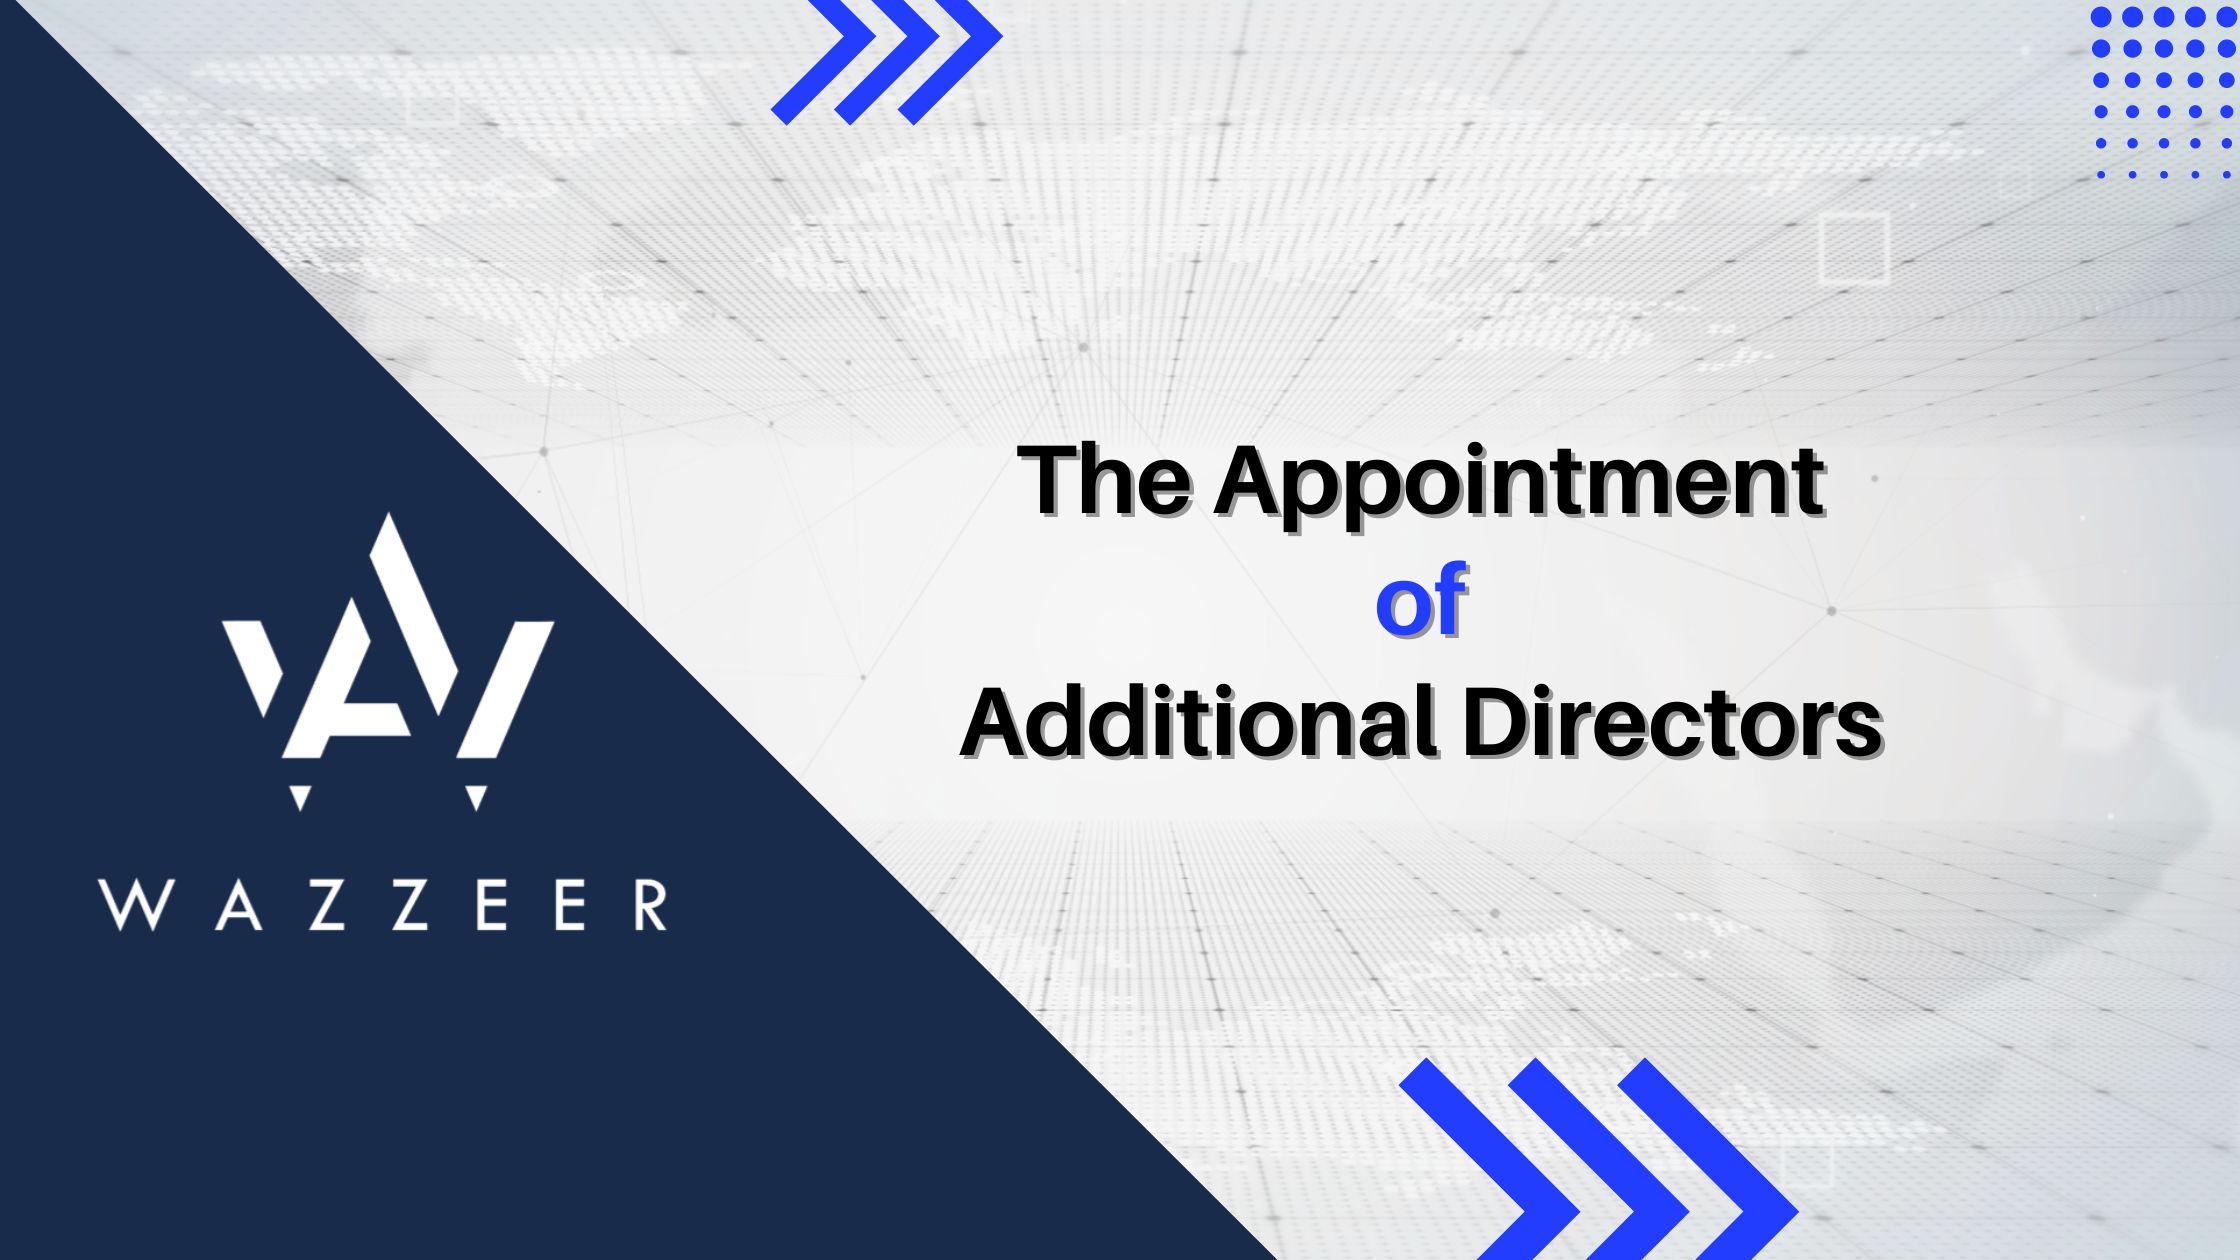 The Appointment of Additional Directors